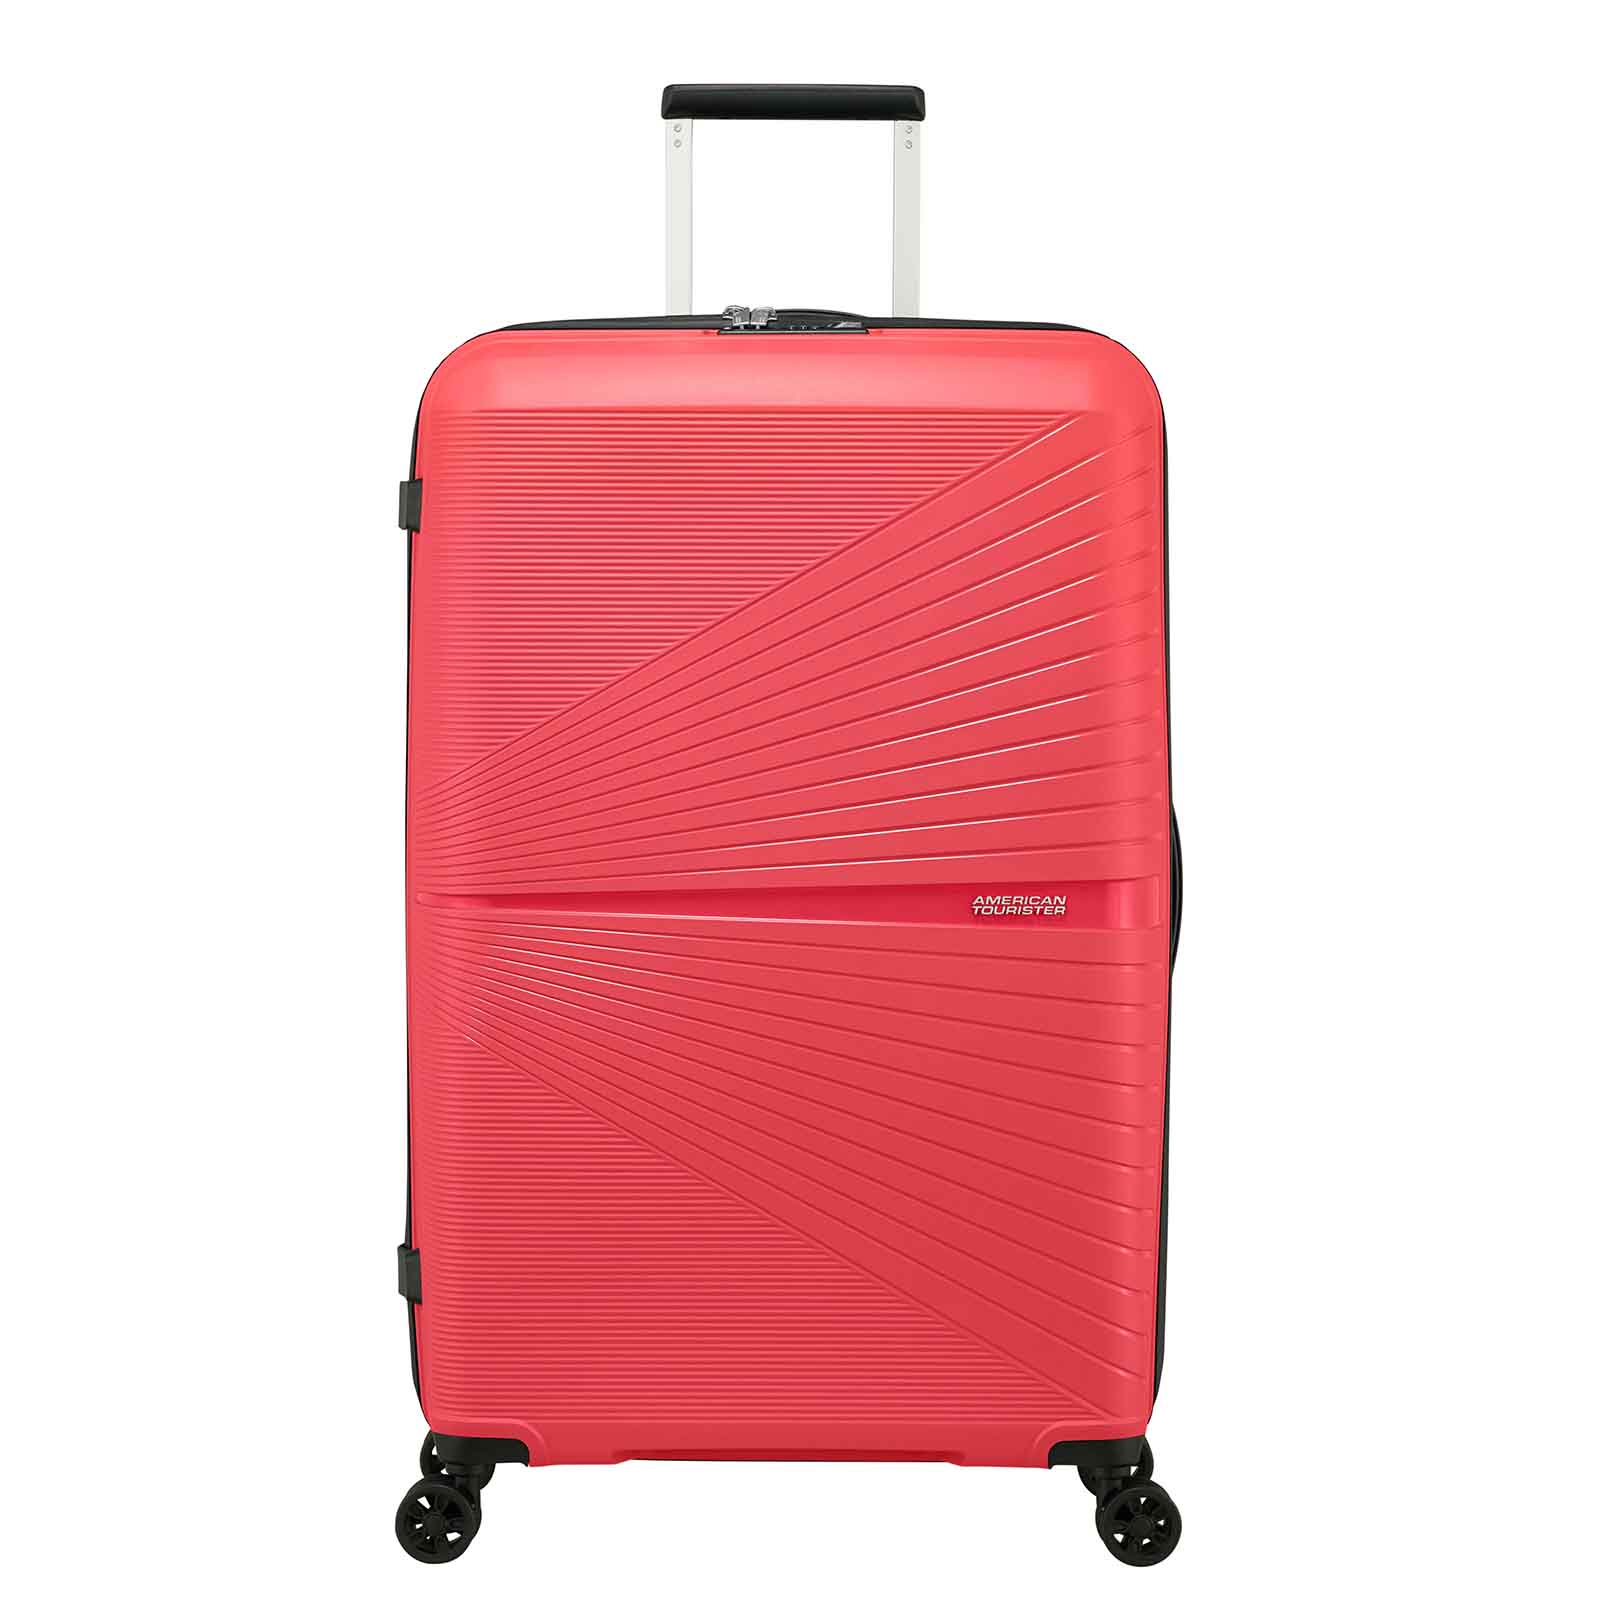 American-Tourister-Airconic-77cm-Suitcase-Paradise-Pink-Front